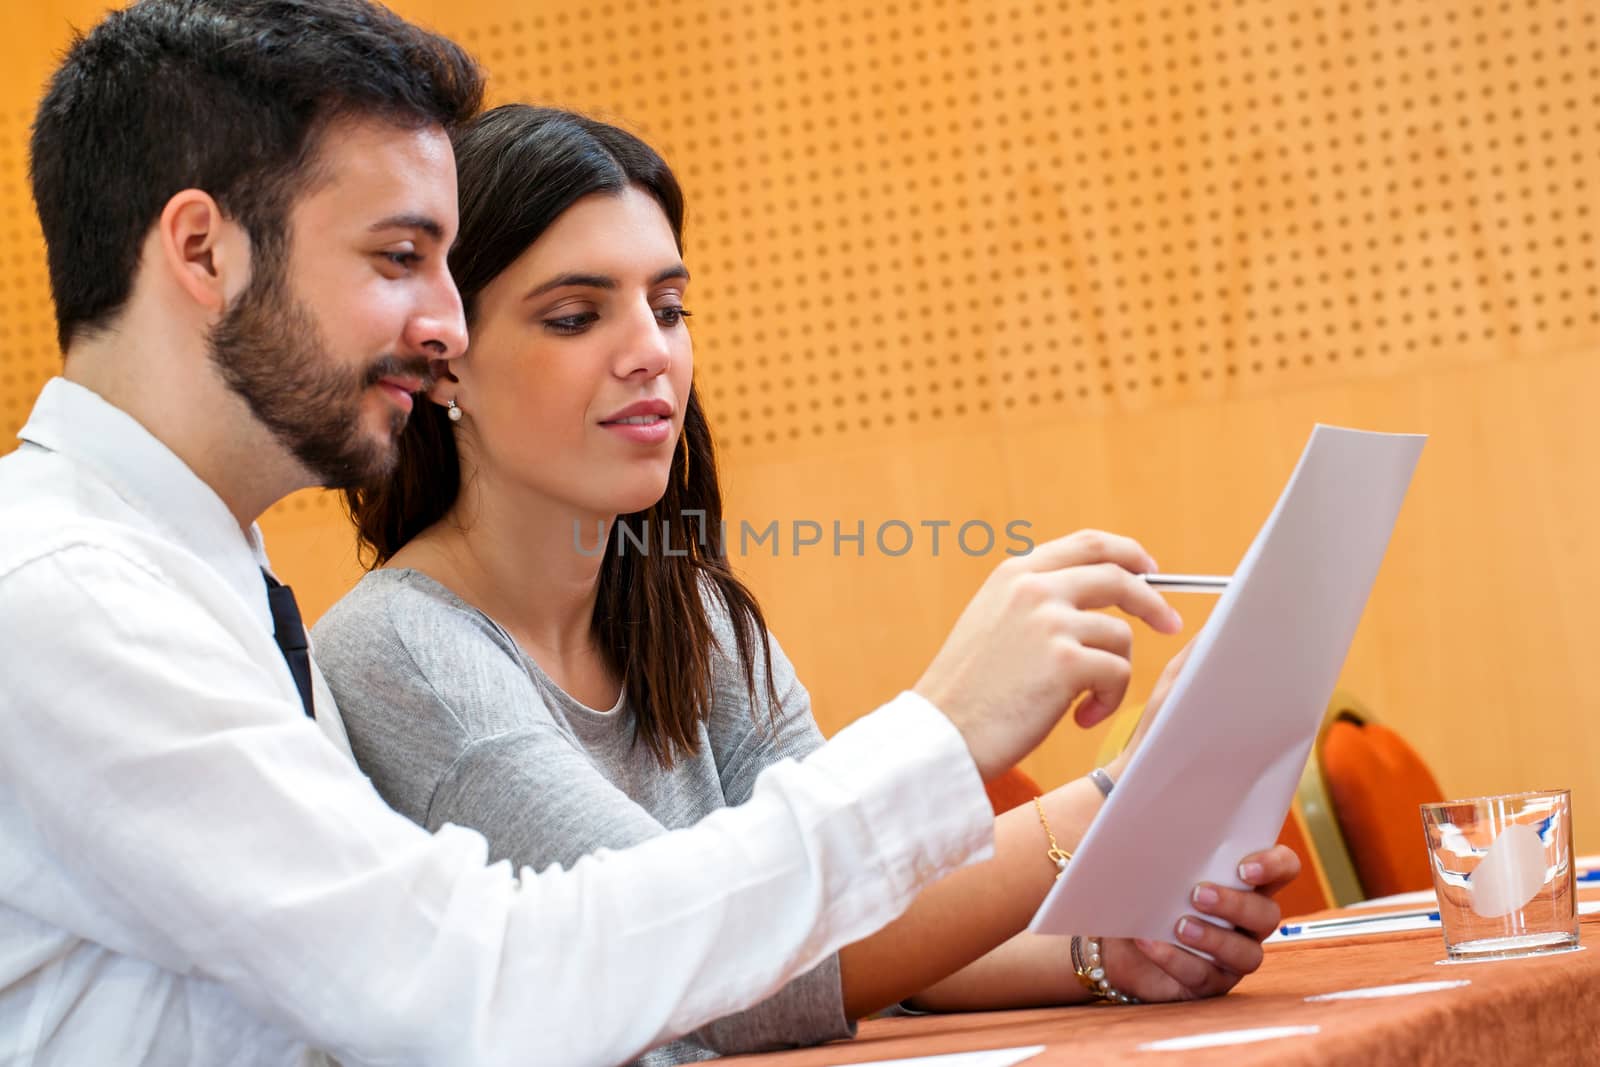 Portrait of young business couple reviewing documents in conference hall.Young man holding document and sharing information with woman.